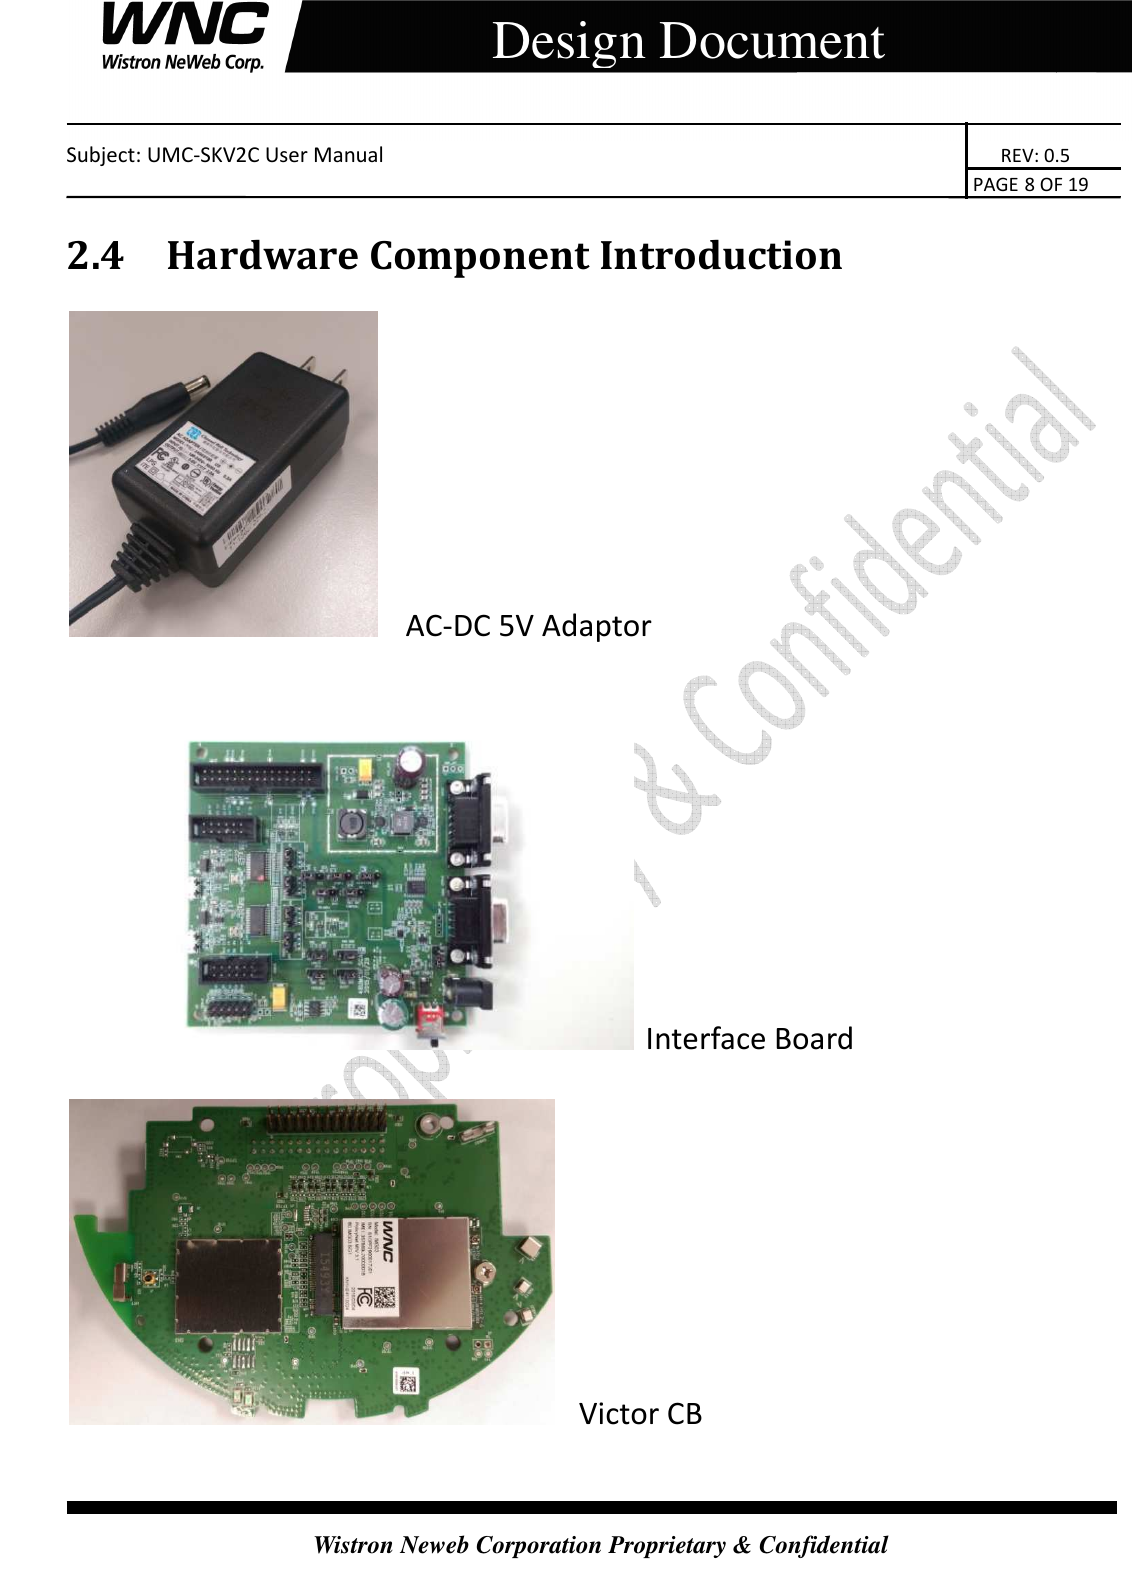    Subject: UMC-SKV2C User Manual                                                                       REV: 0.5                                                                                                                                                                               PAGE 8 OF 19  Wistron Neweb Corporation Proprietary &amp; Confidential     Design Document 2.4 Hardware Component Introduction   AC-DC 5V Adaptor   Interface Board      Victor CB  